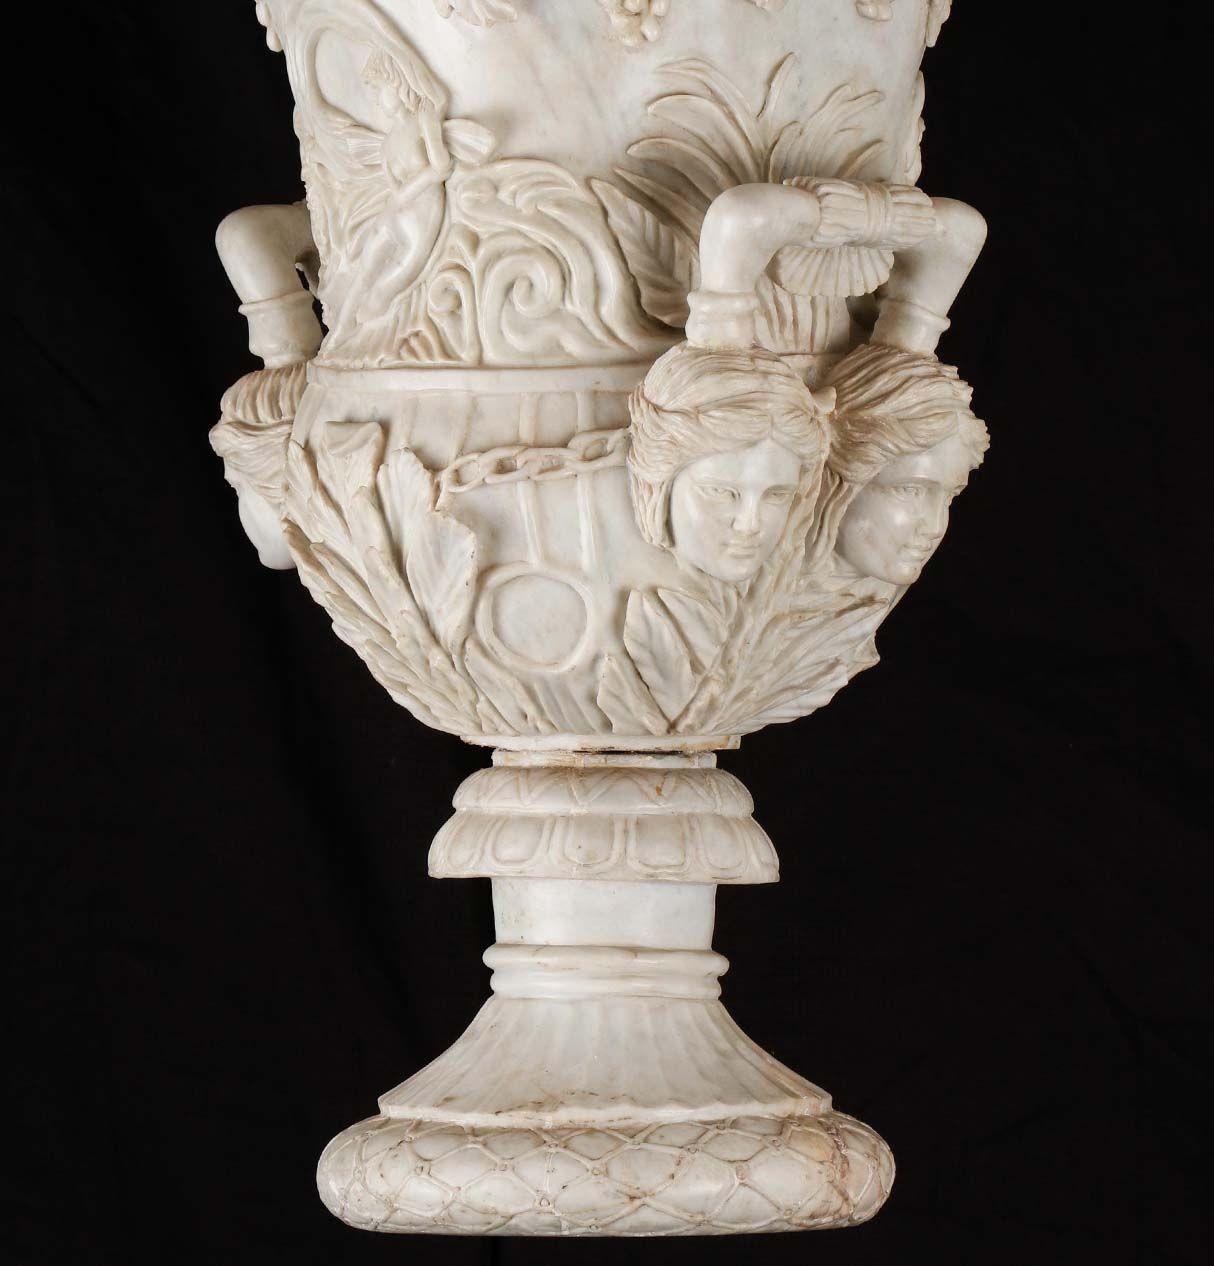 Pair of Italian Palatial Garden Urns/Medici Vases with Carved Marble For Sale 1